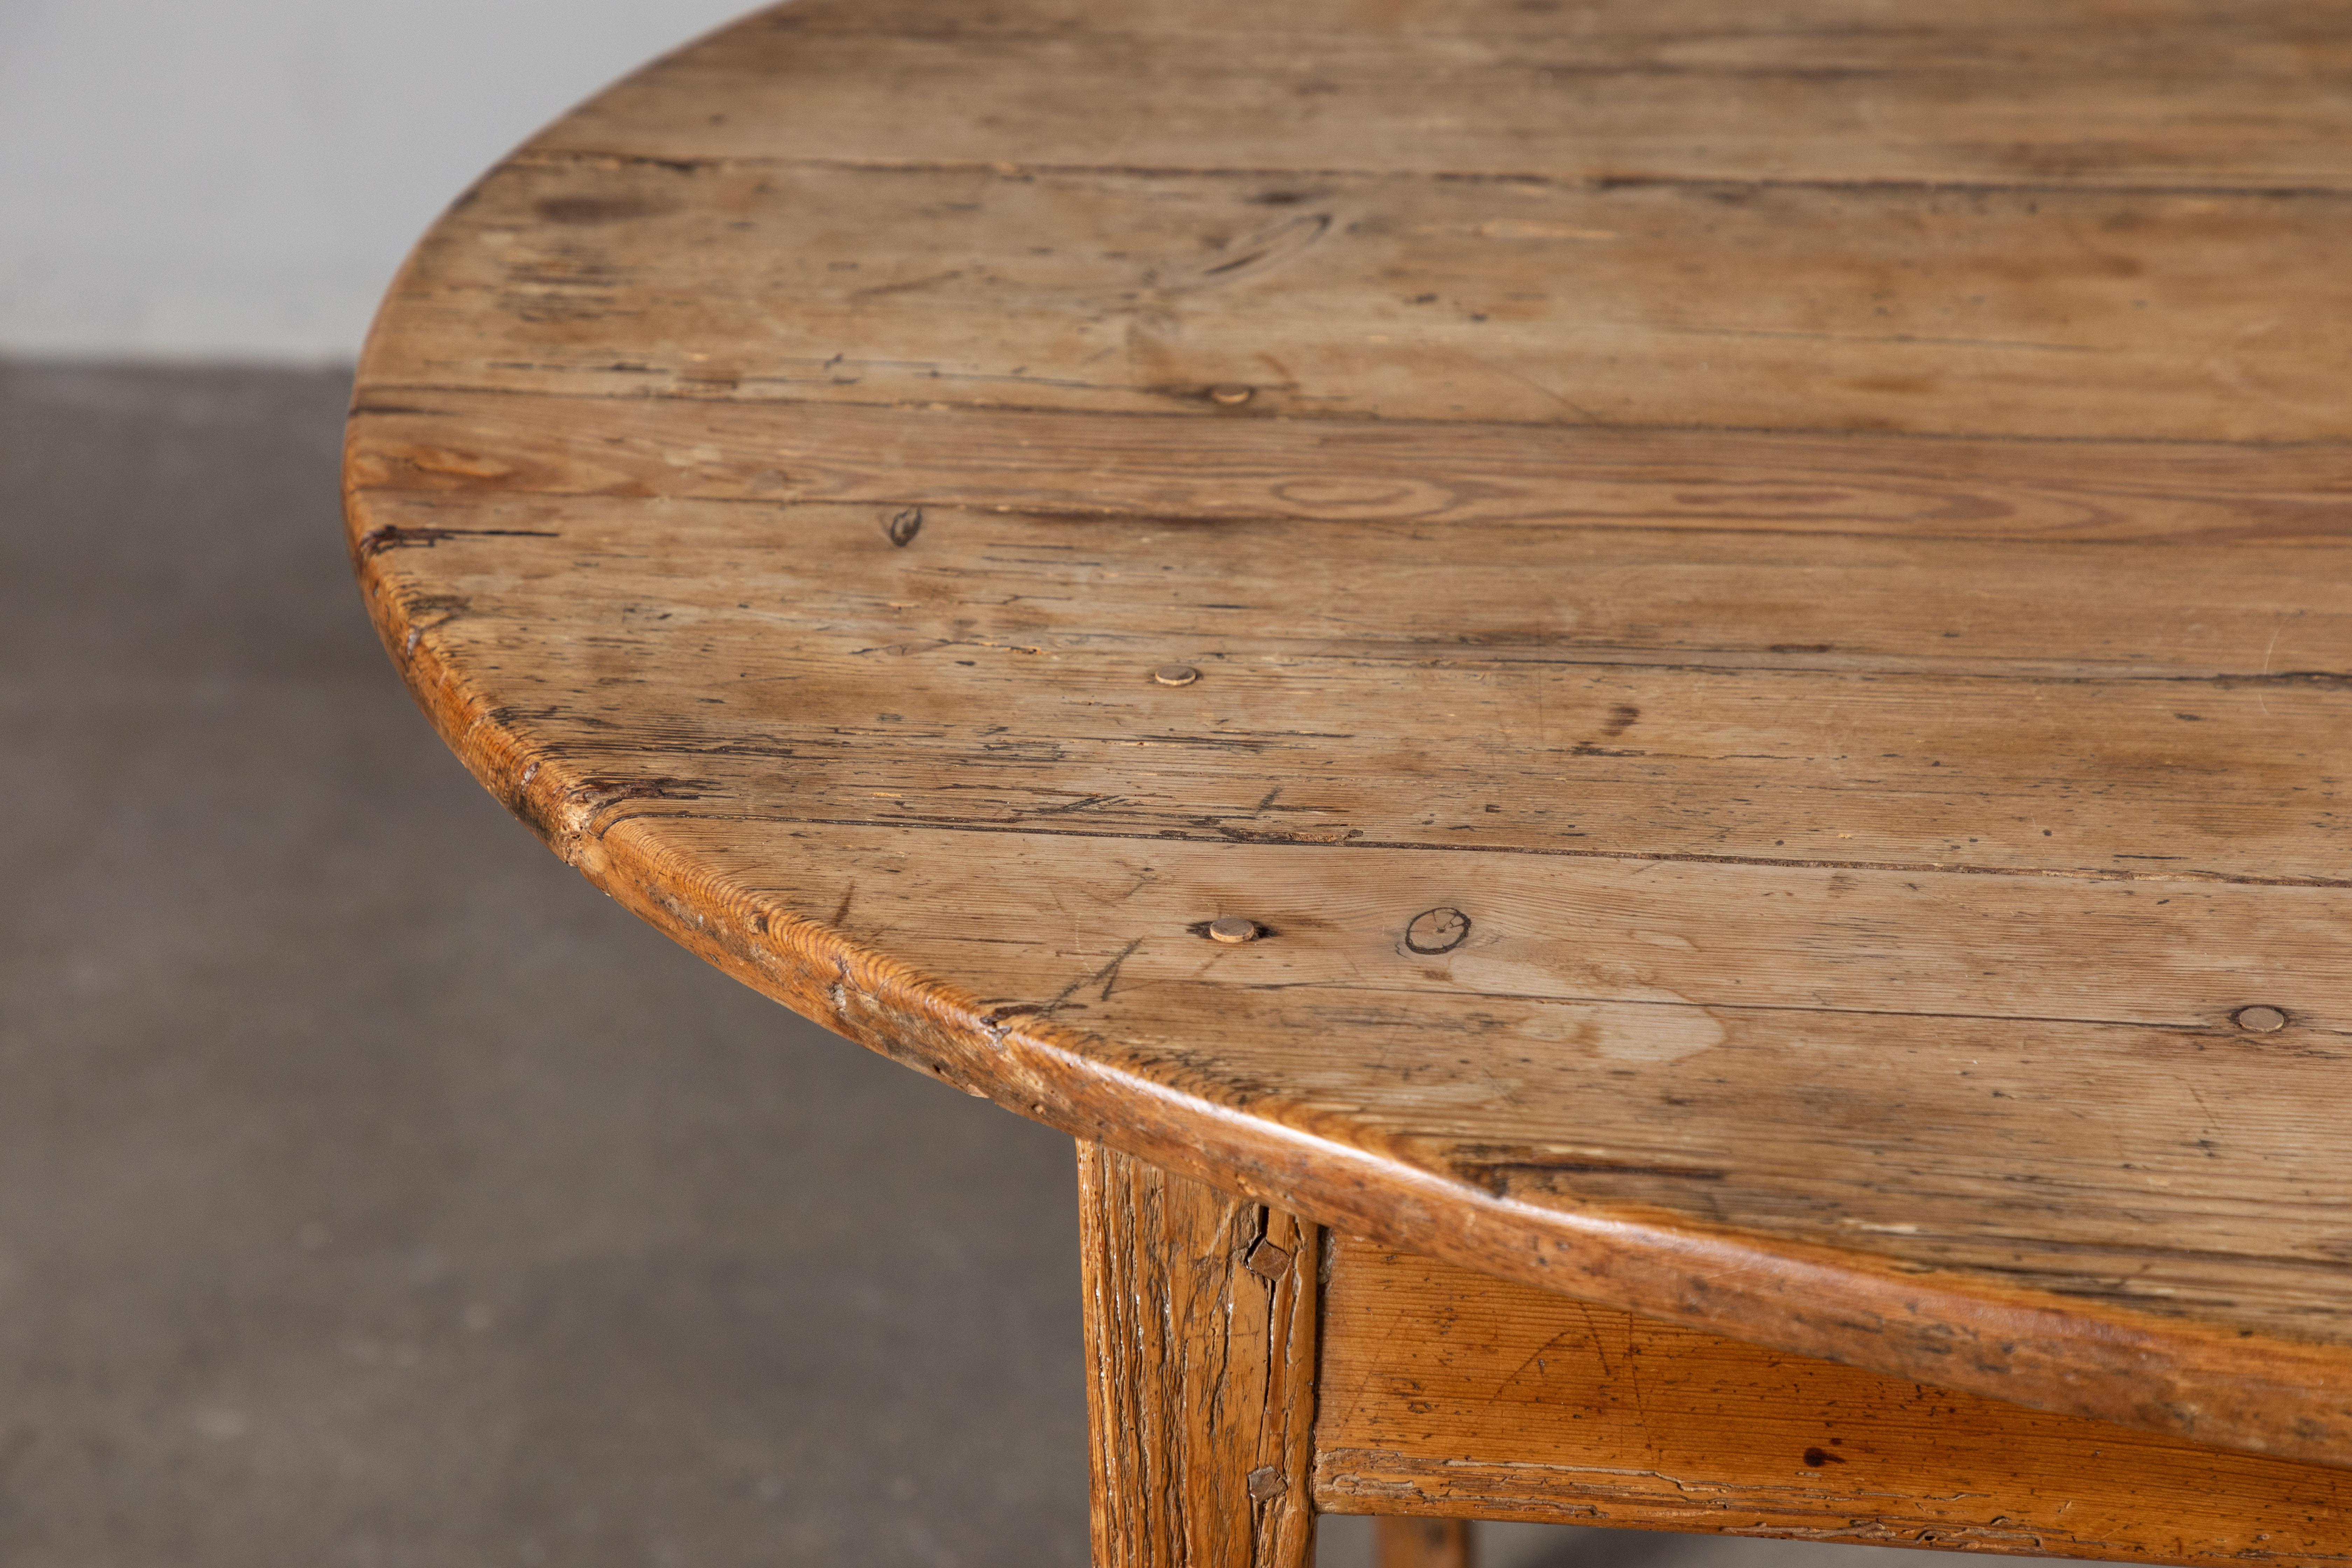 Rustic oval pine dining table with apron and tapered legs.